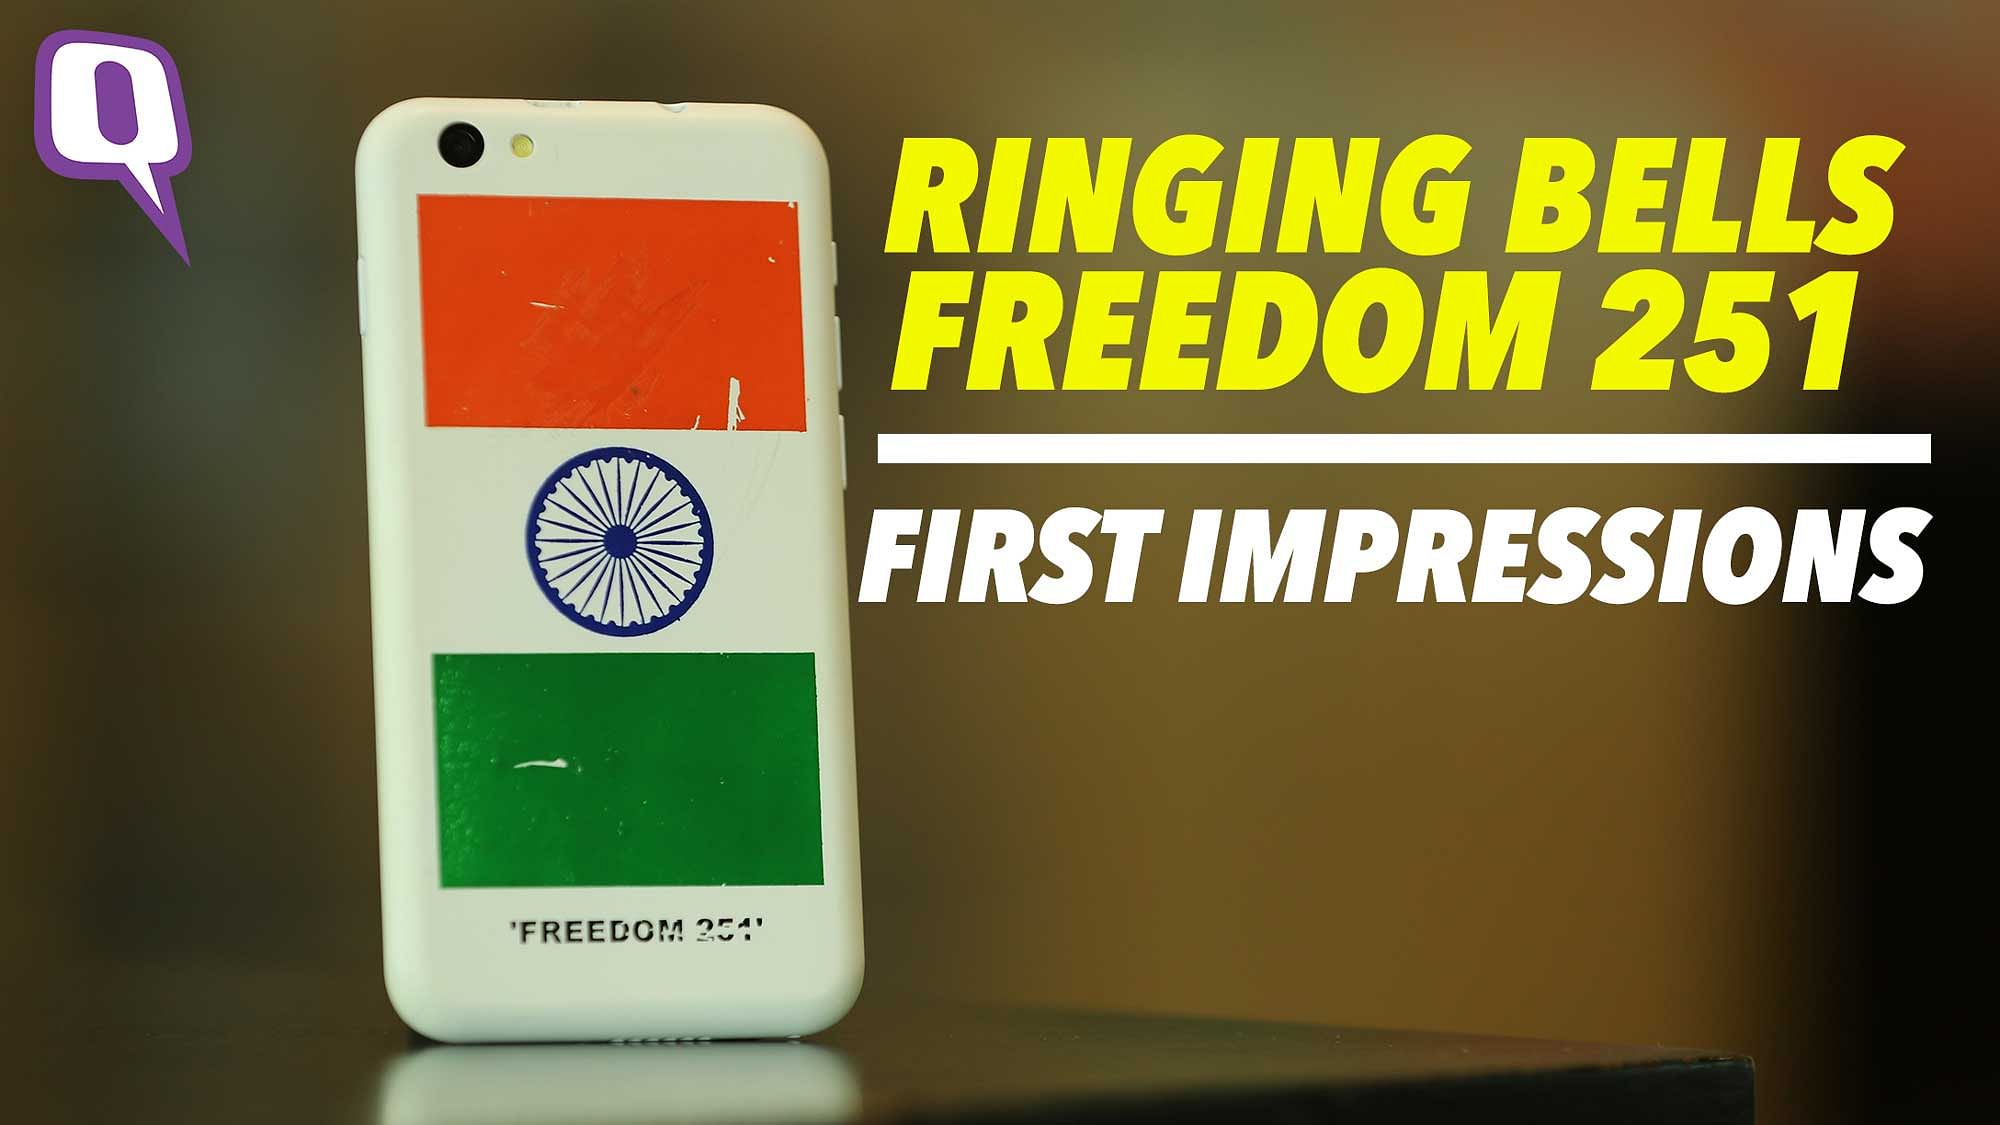 Ringing Bells’ Freedom 251 smartphone is the cheapest smartphone in the world. (Photo: <b>The Quint</b>)